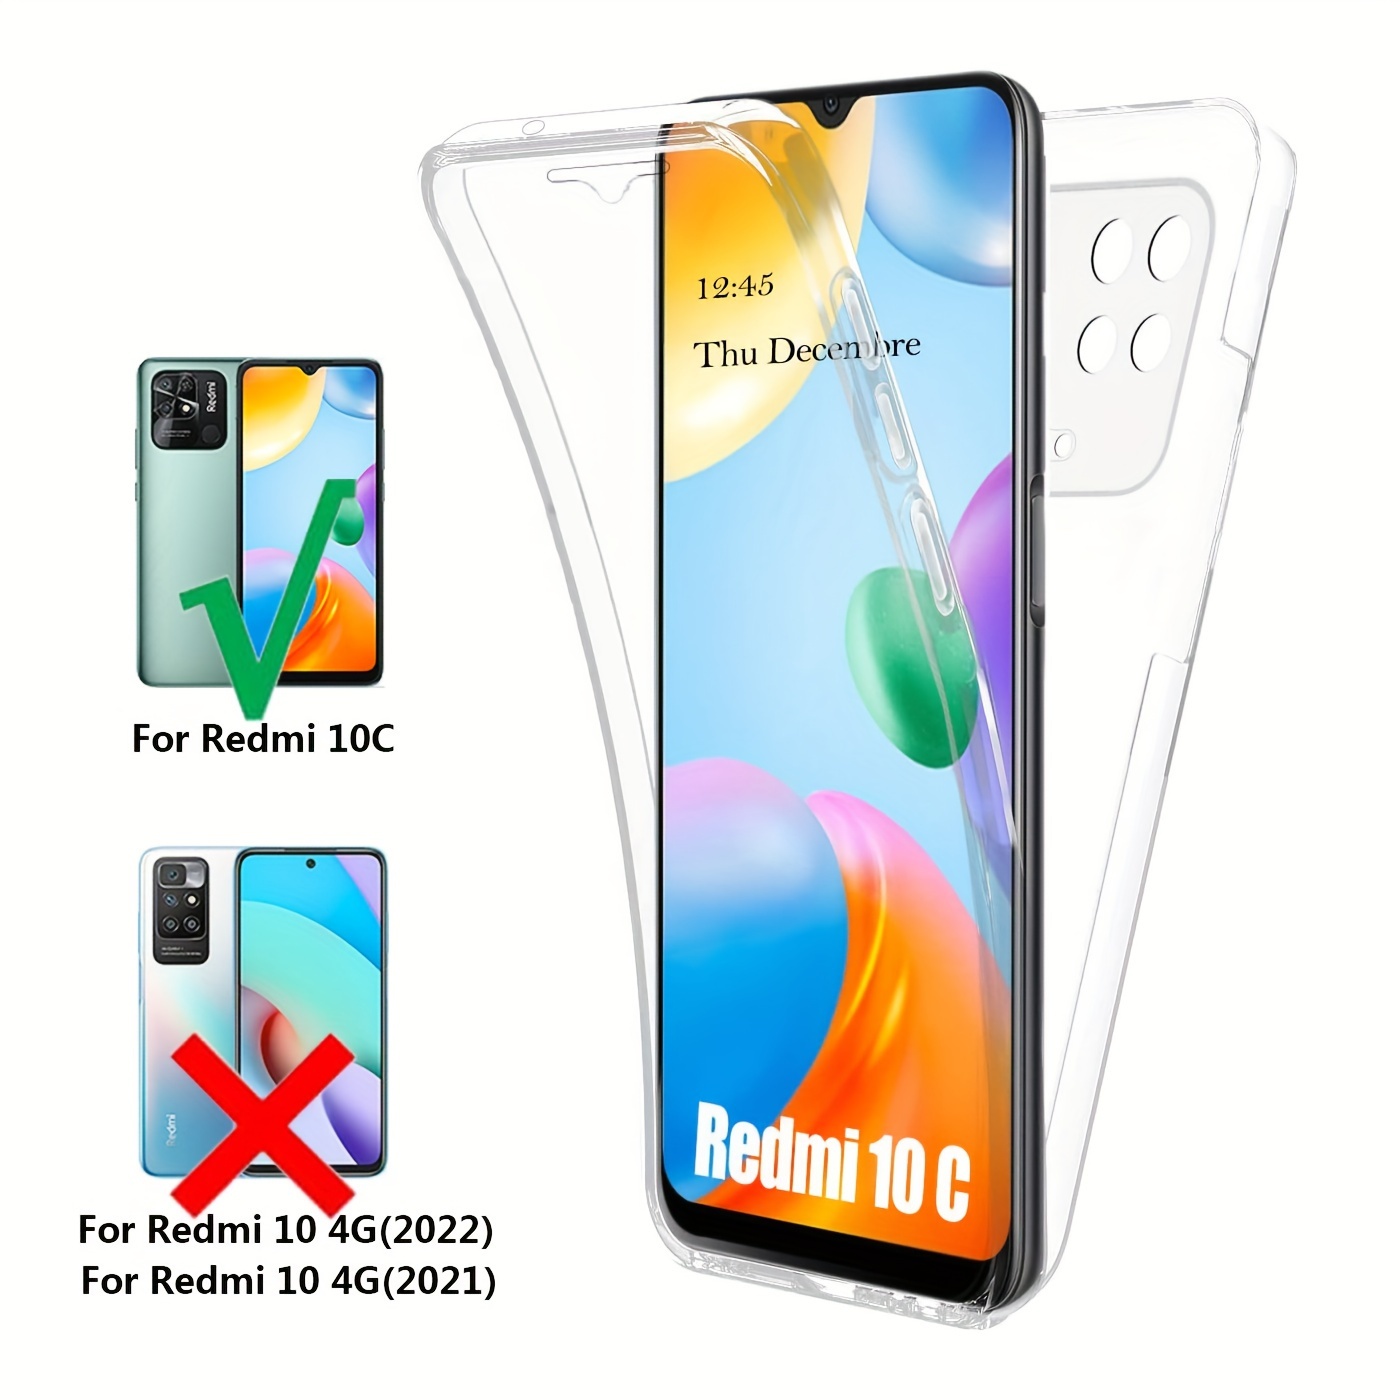 For XIAOMI REDMI 10 2022 TEMPERED GLASS SCREEN PROTECTOR + CLEAR SILICONE  CASE